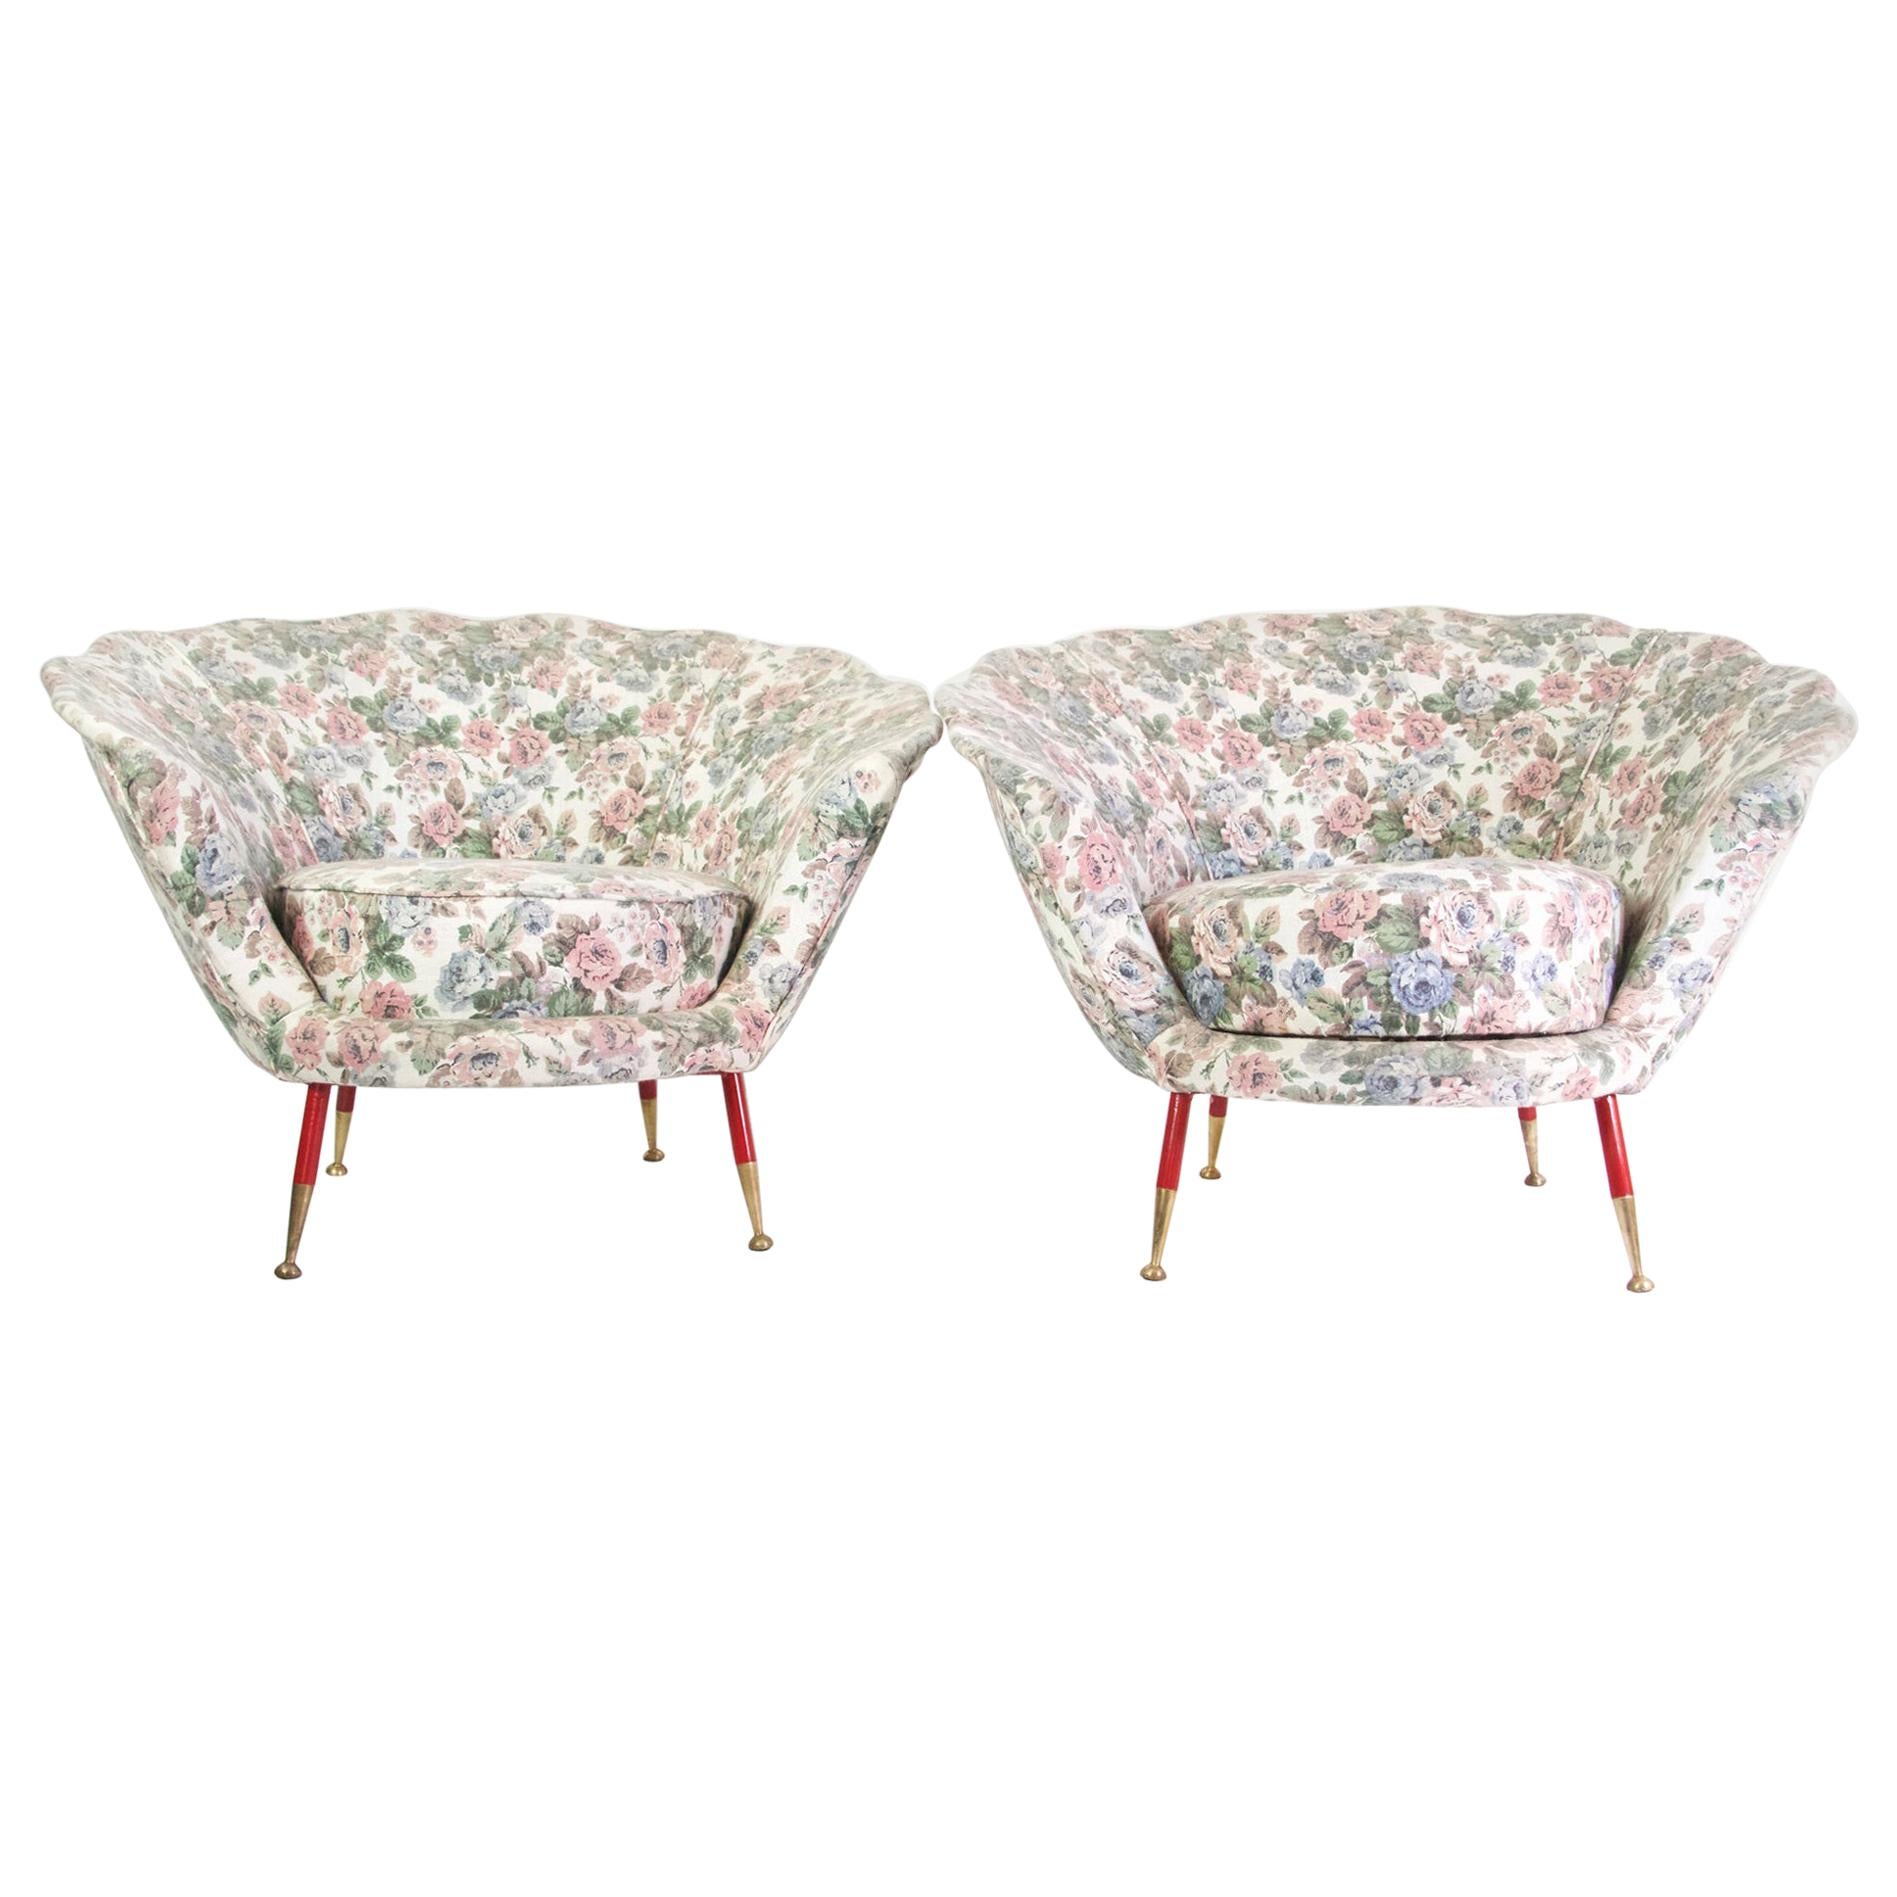 A pair of elegant Italian armchairs from circa 1950. The chairs are in good solid condition but are in need of reupholstery.